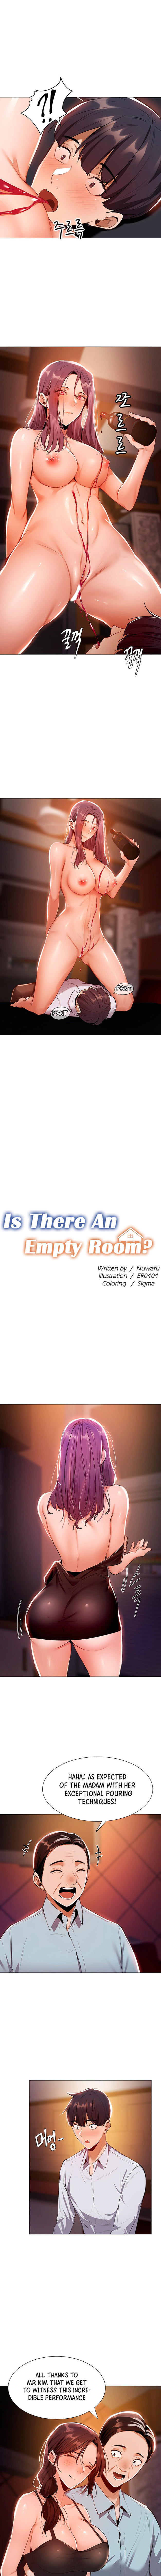 Is there an Empty Room? - Chapter 7 Page 4